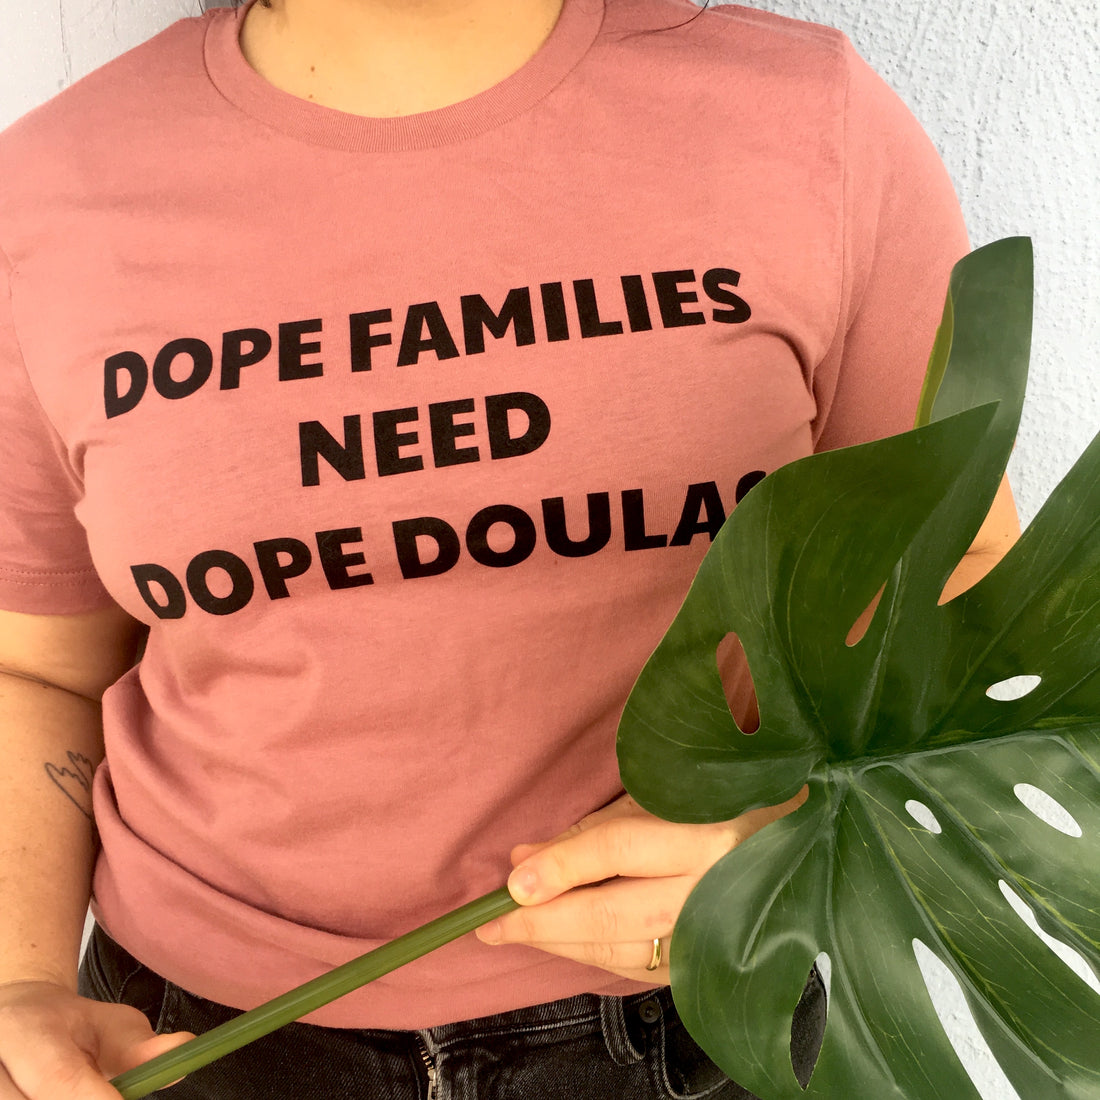 Introducing The Dope Families Need Dope Doulas Campaign